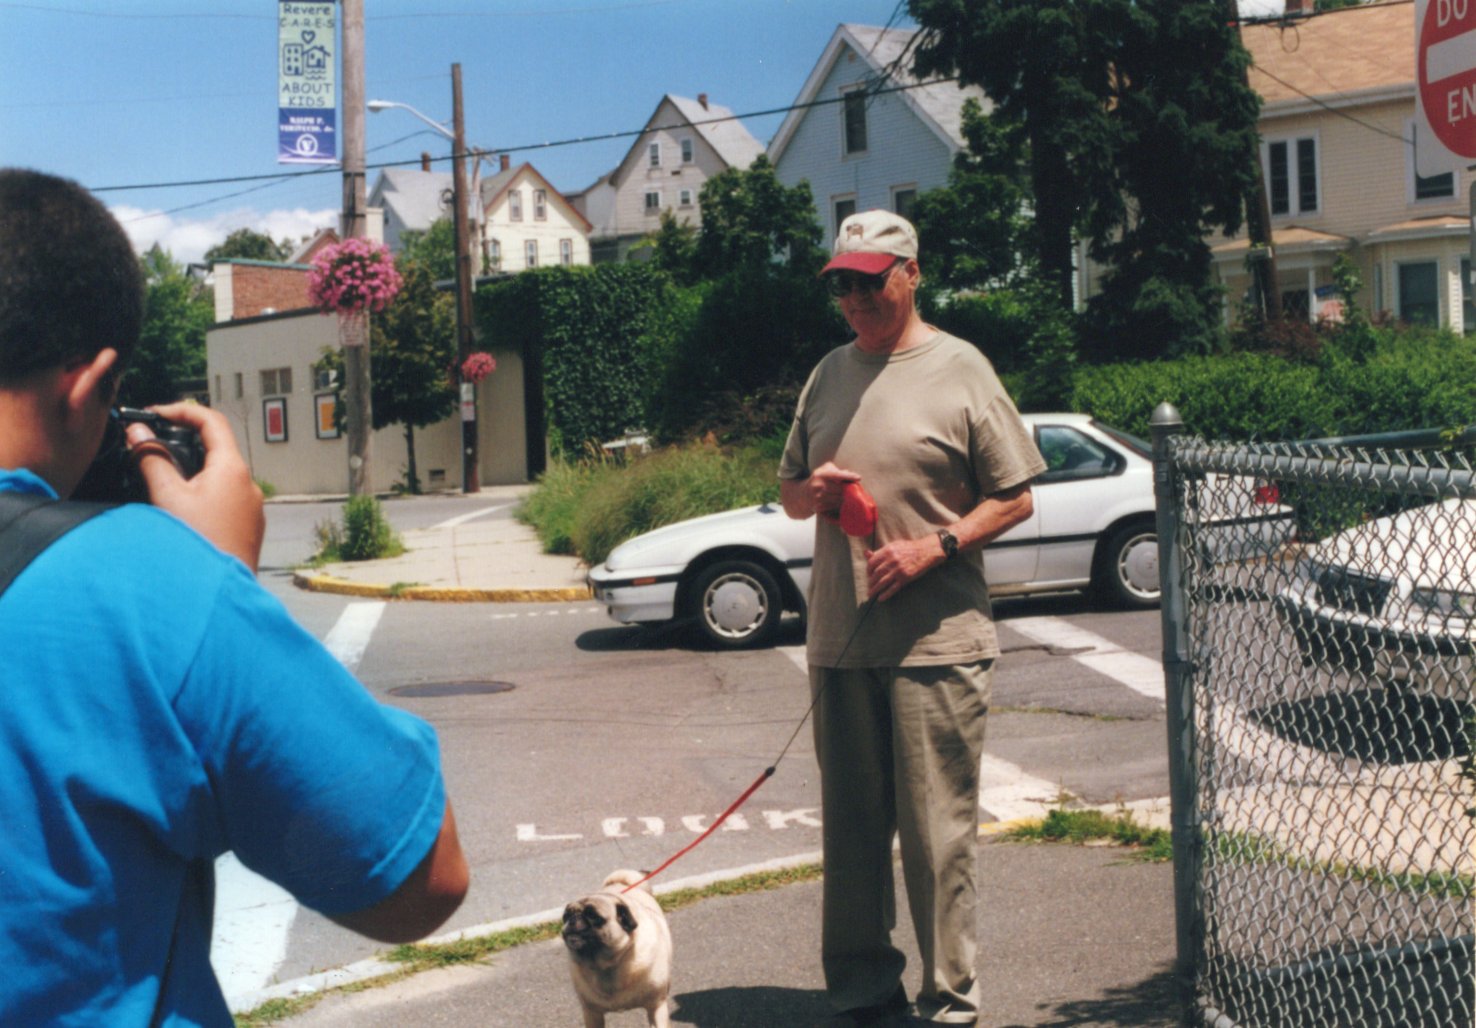 a youth in a blue shirt takes a photo of an older man and his dog